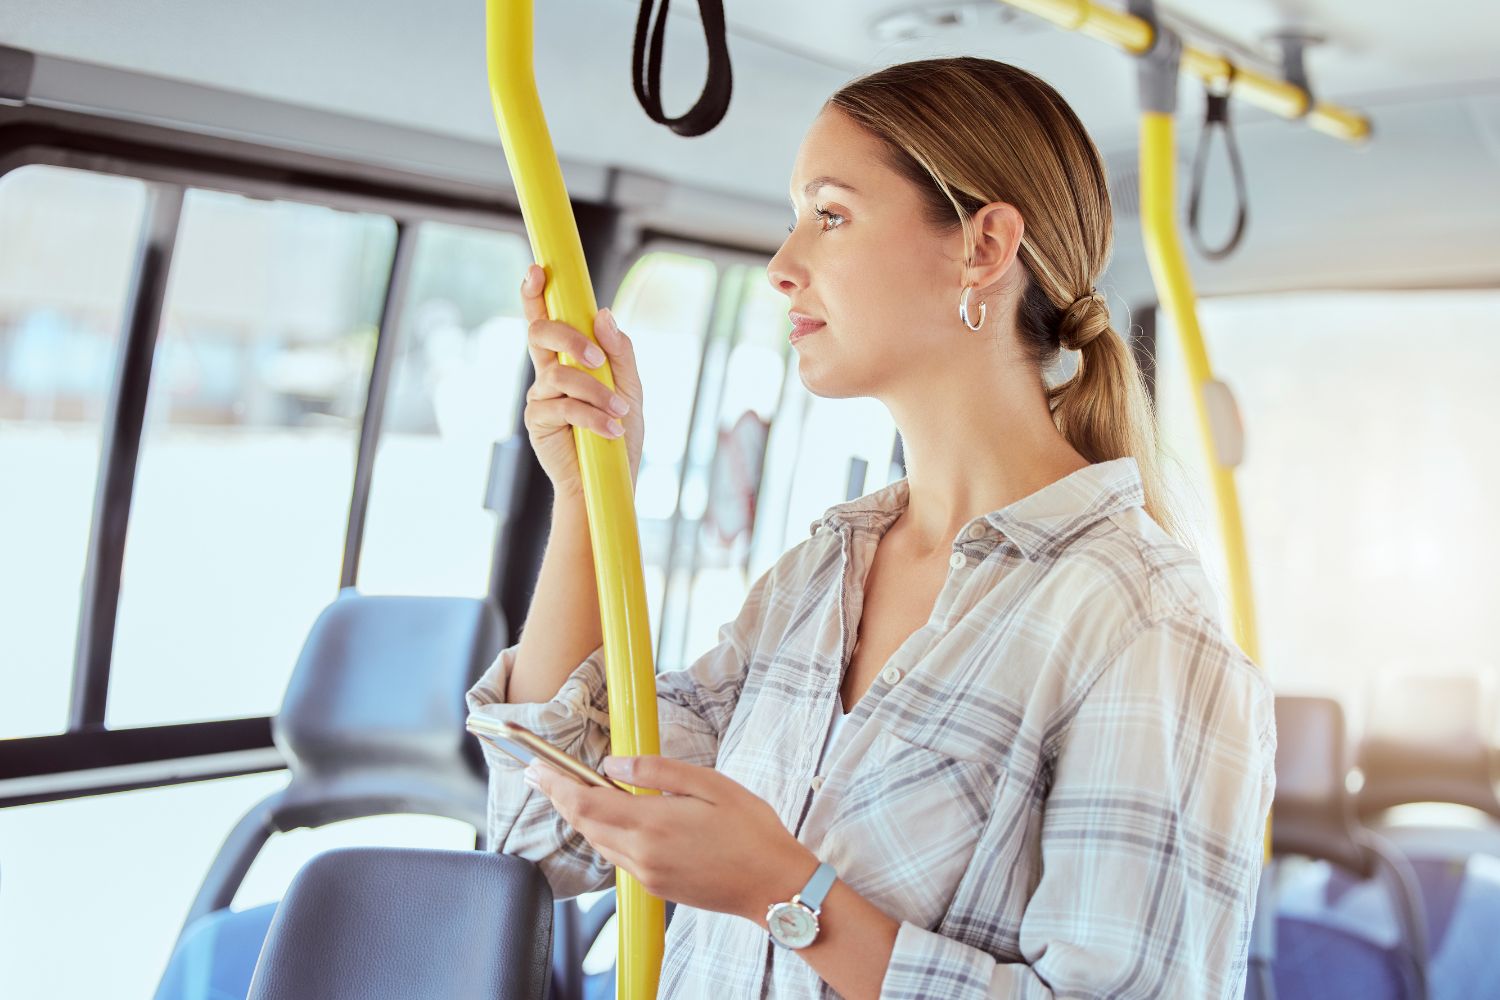 A woman in a plaid shirt is standing on a bus holding on to a yellow pole. She is looking at the window and holding her cell phone in one hand.